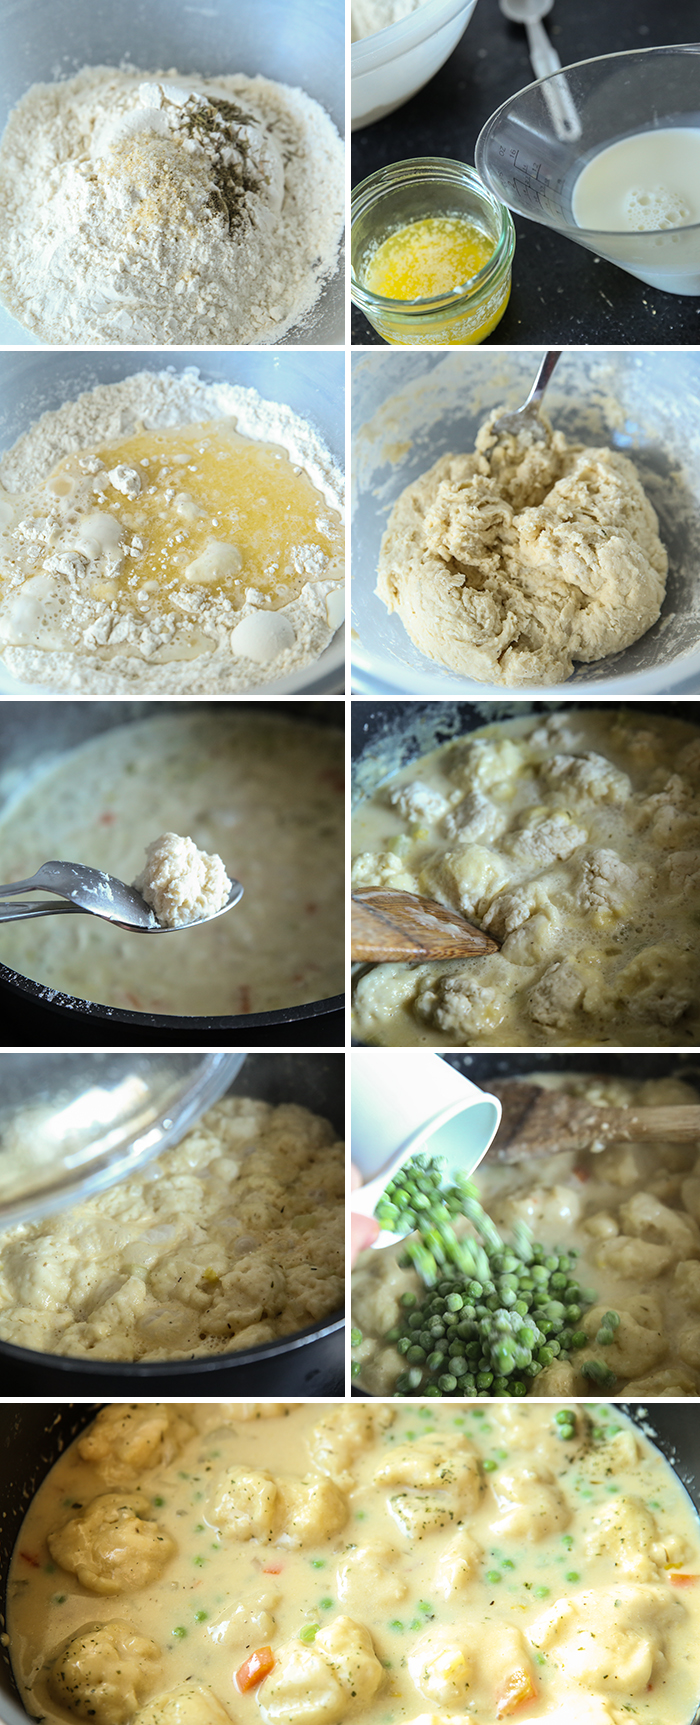 9-photo picture collage on how to make the dumplings for creamy chicken soup.